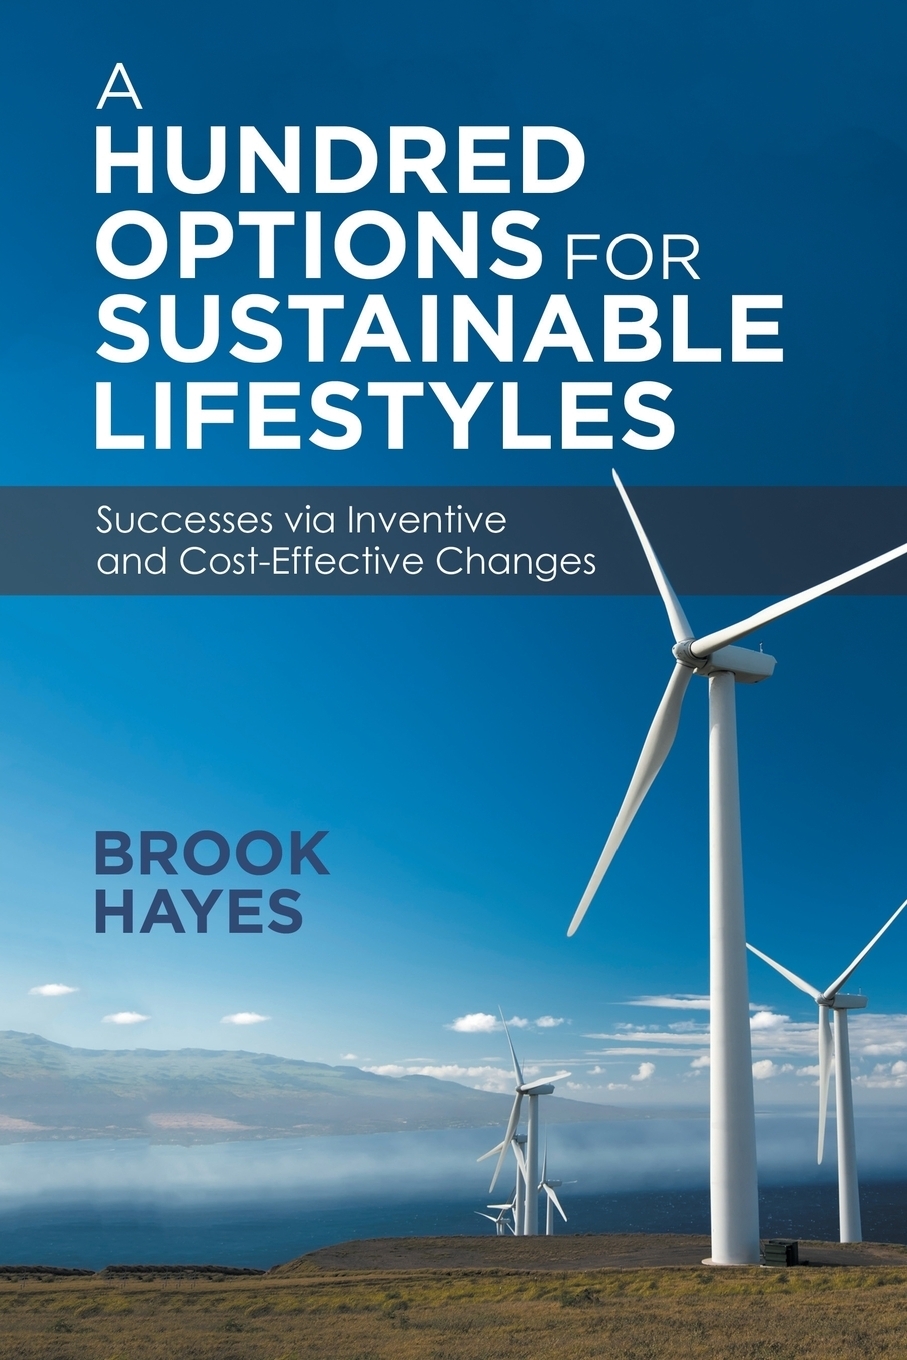 A Hundred Options For Sustainable Lifestyles. Successes via Inventive and Cost-Effective Changes